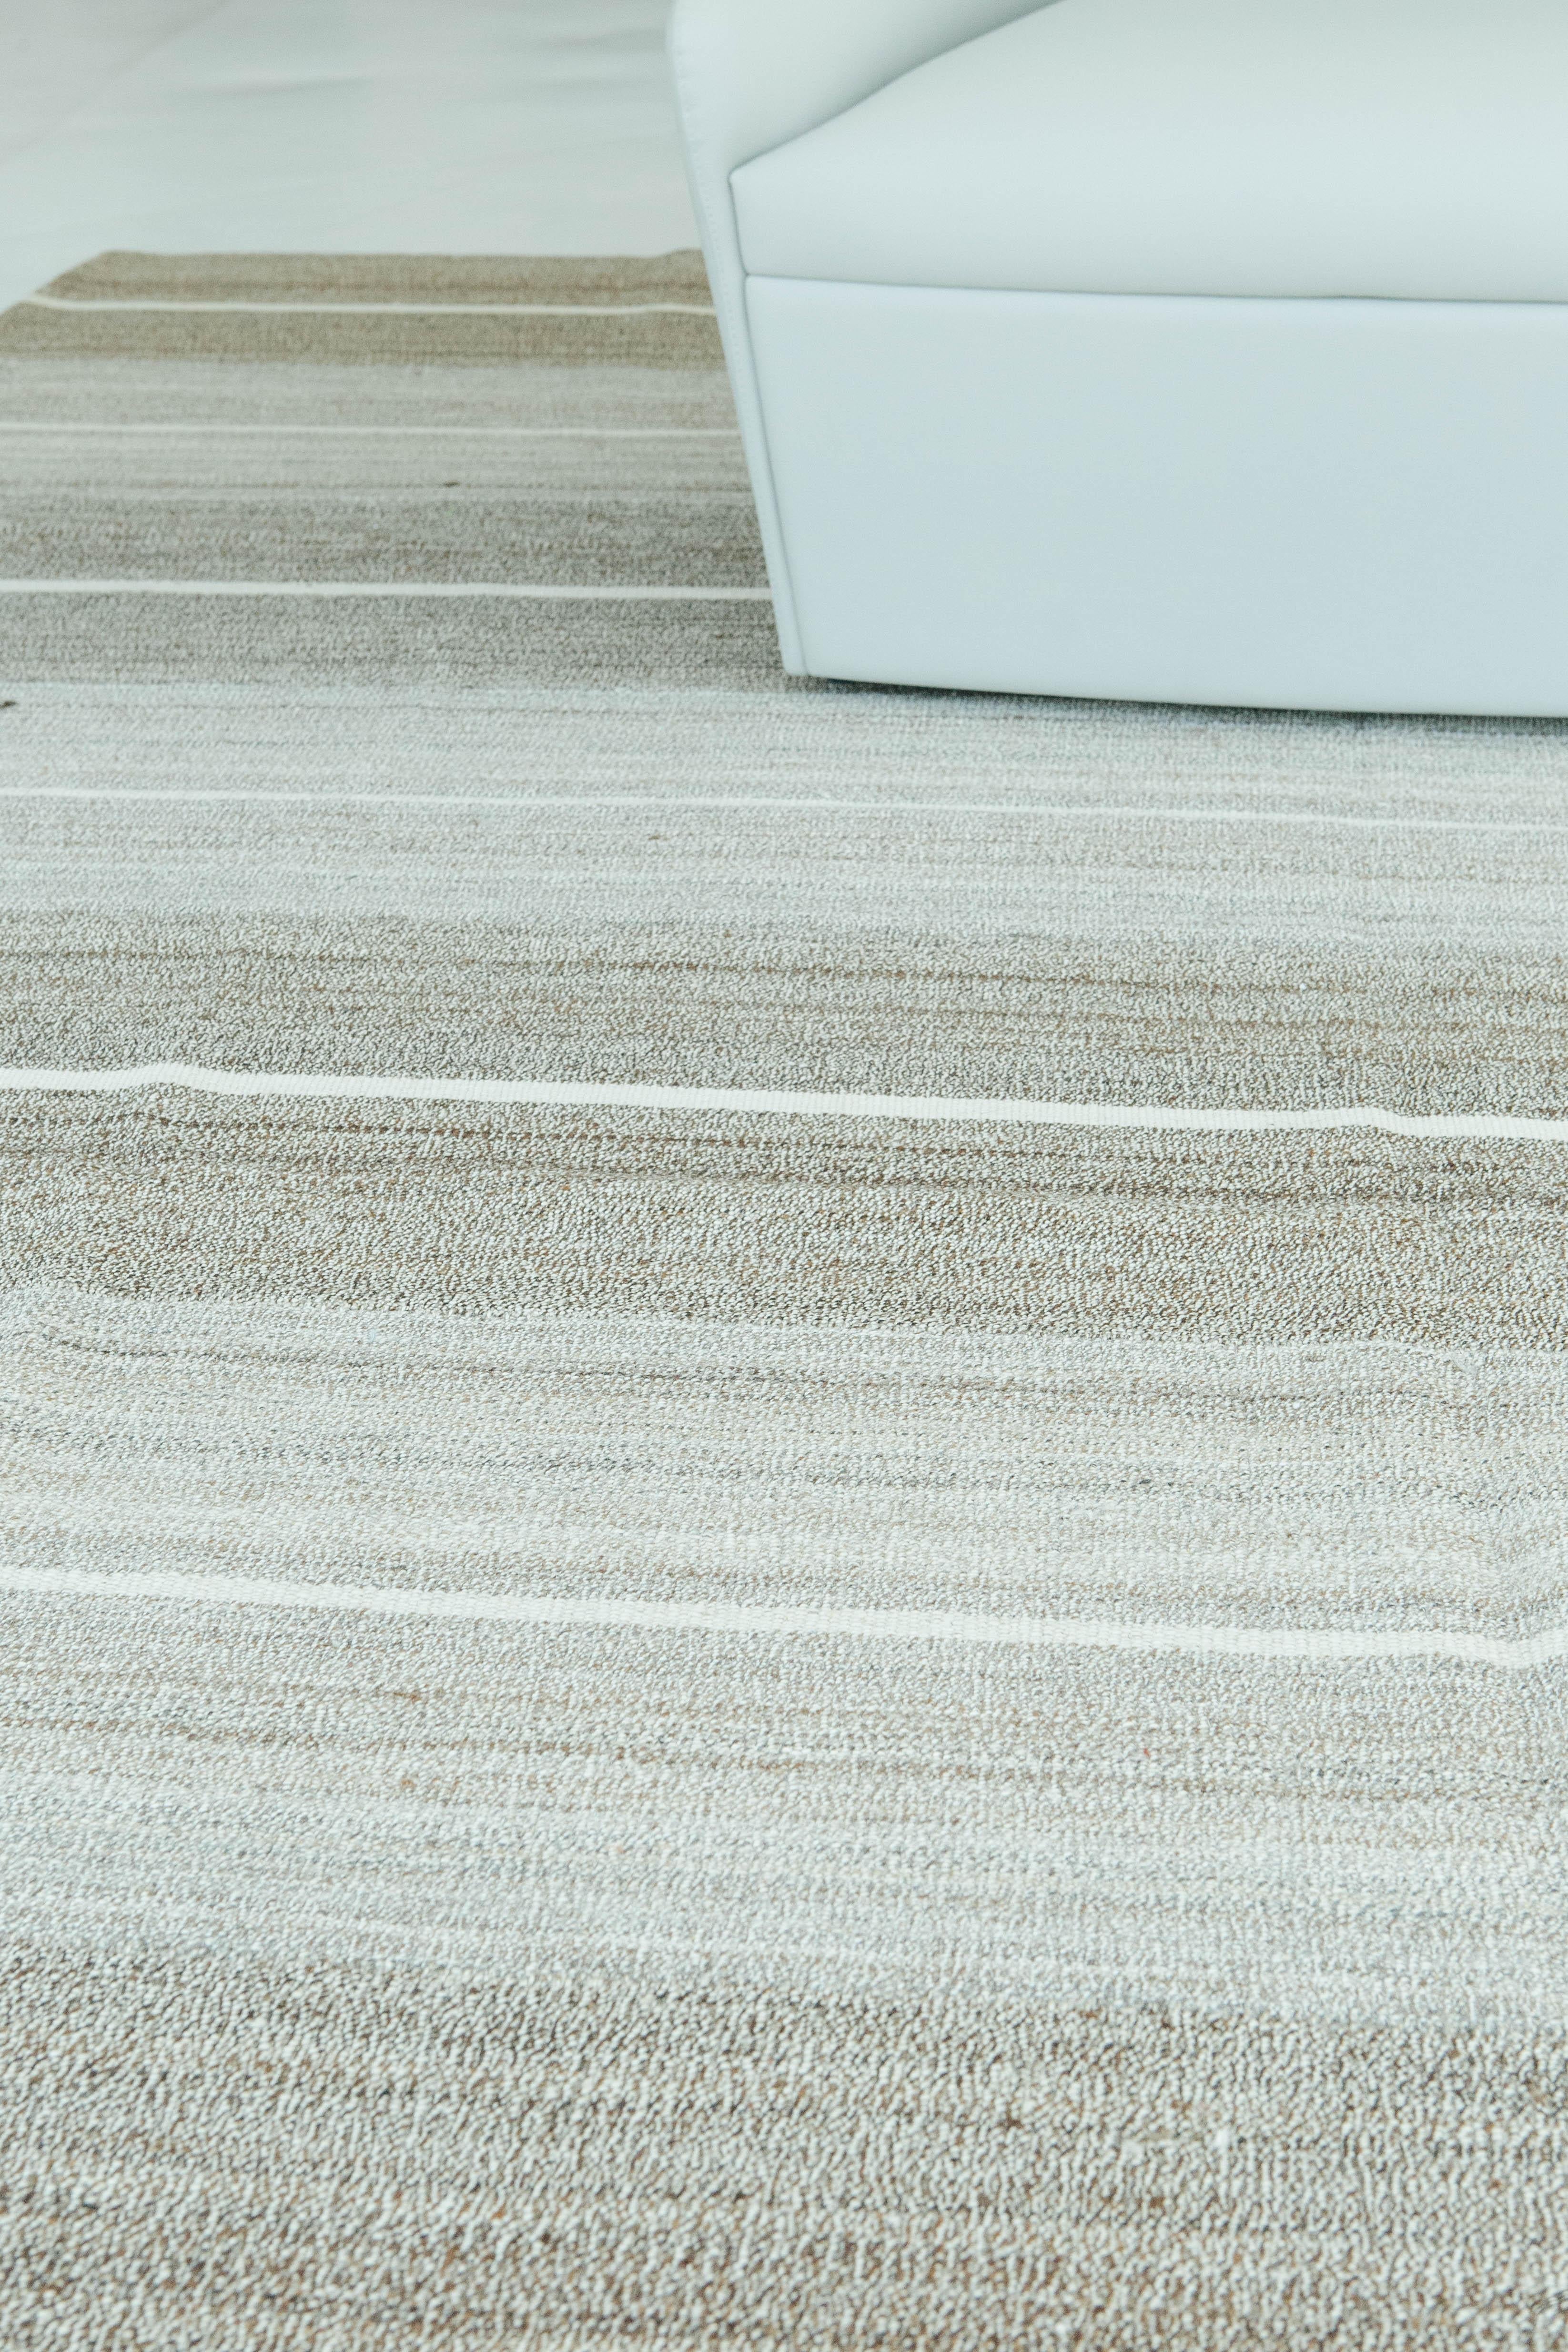 The perfect vintage Anatolian Turkish flat-weave in a soft taupe and the perfect white colors. The rugs stripe design creates an effortless and chic vibe. This flat-weave's interesting texture and pattern will bring character to any design